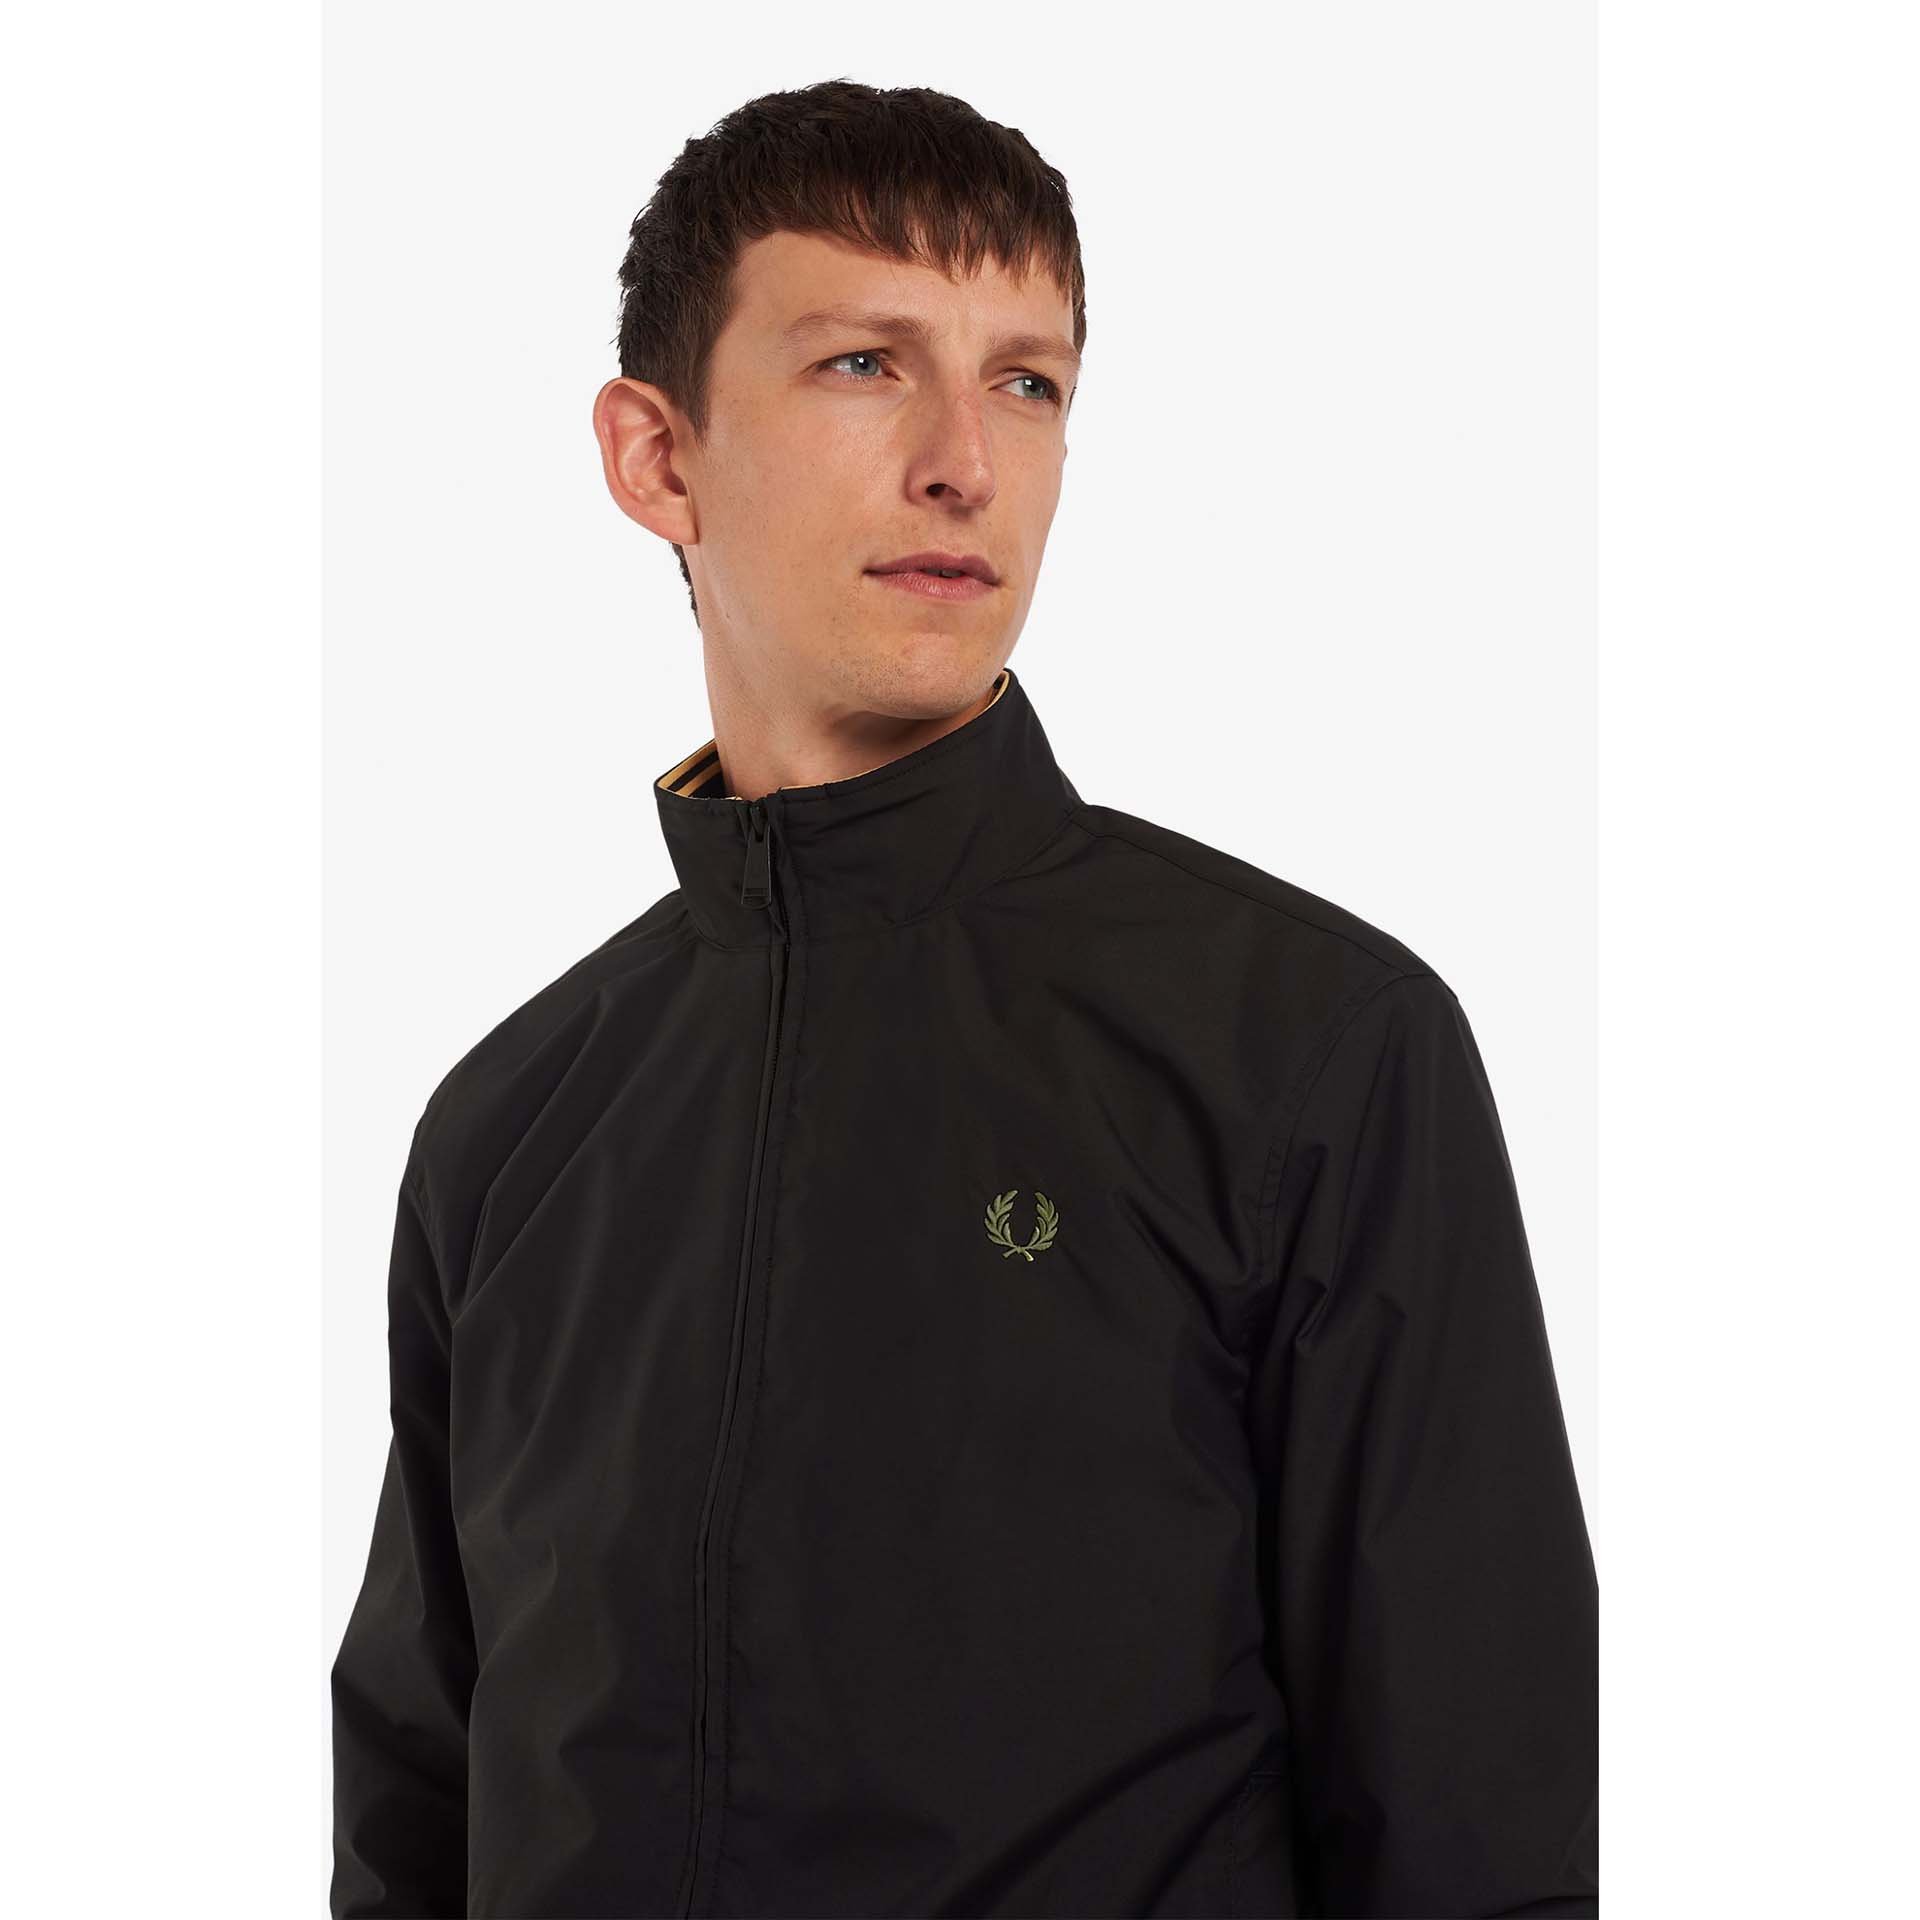 Fred Perry Brentham Jacket Black